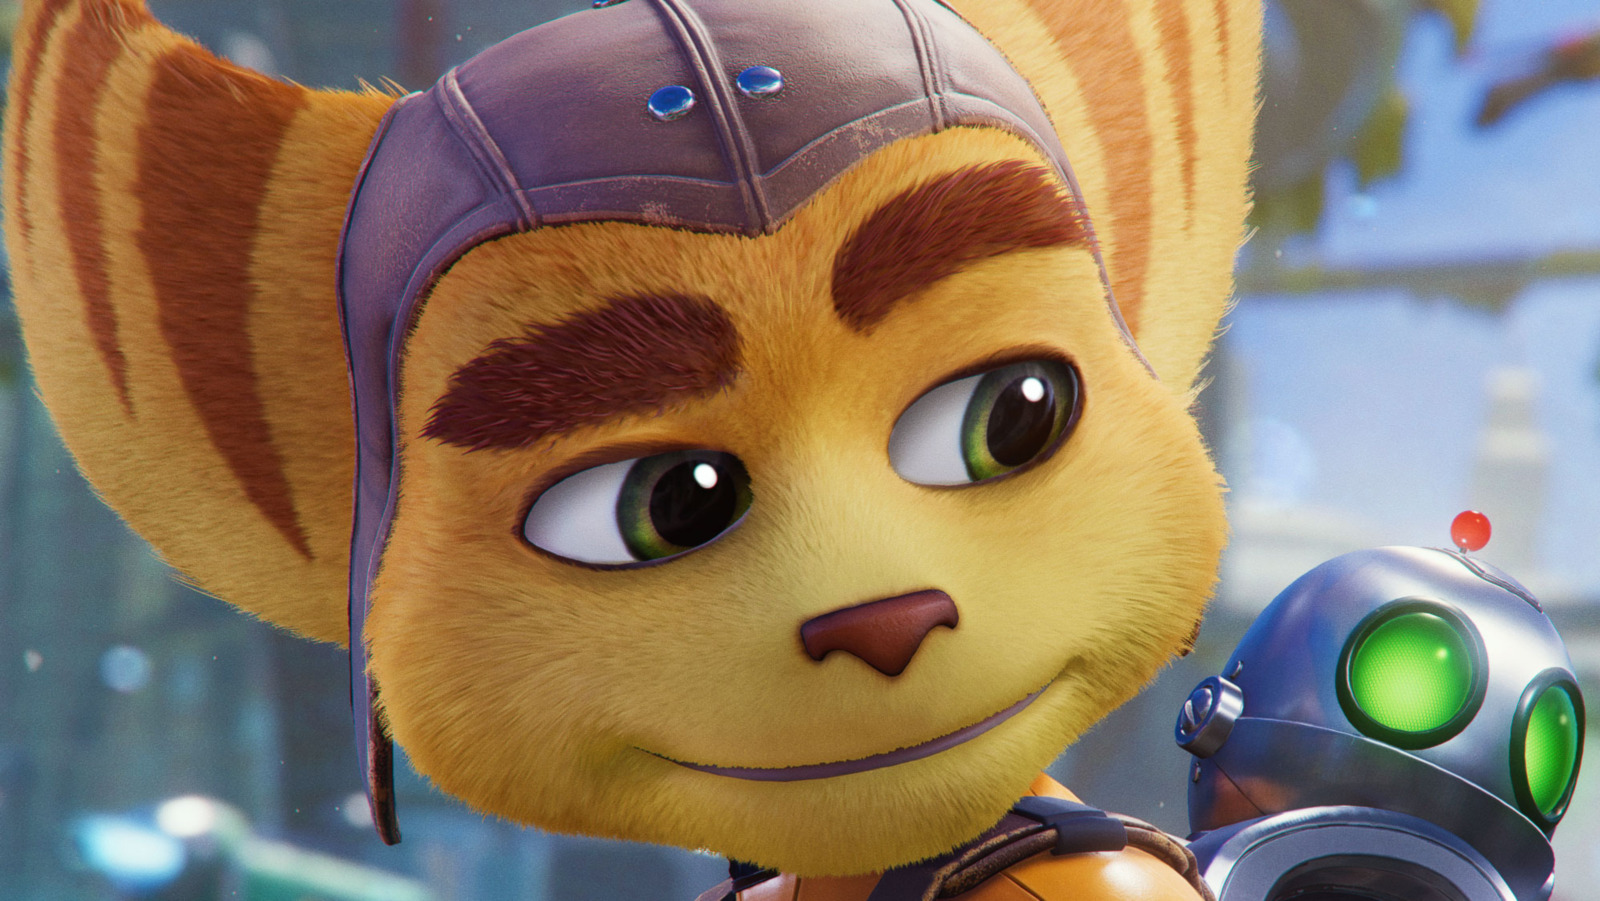 This is How Ratchet and Clank: Rift Apart would Run on PS4 